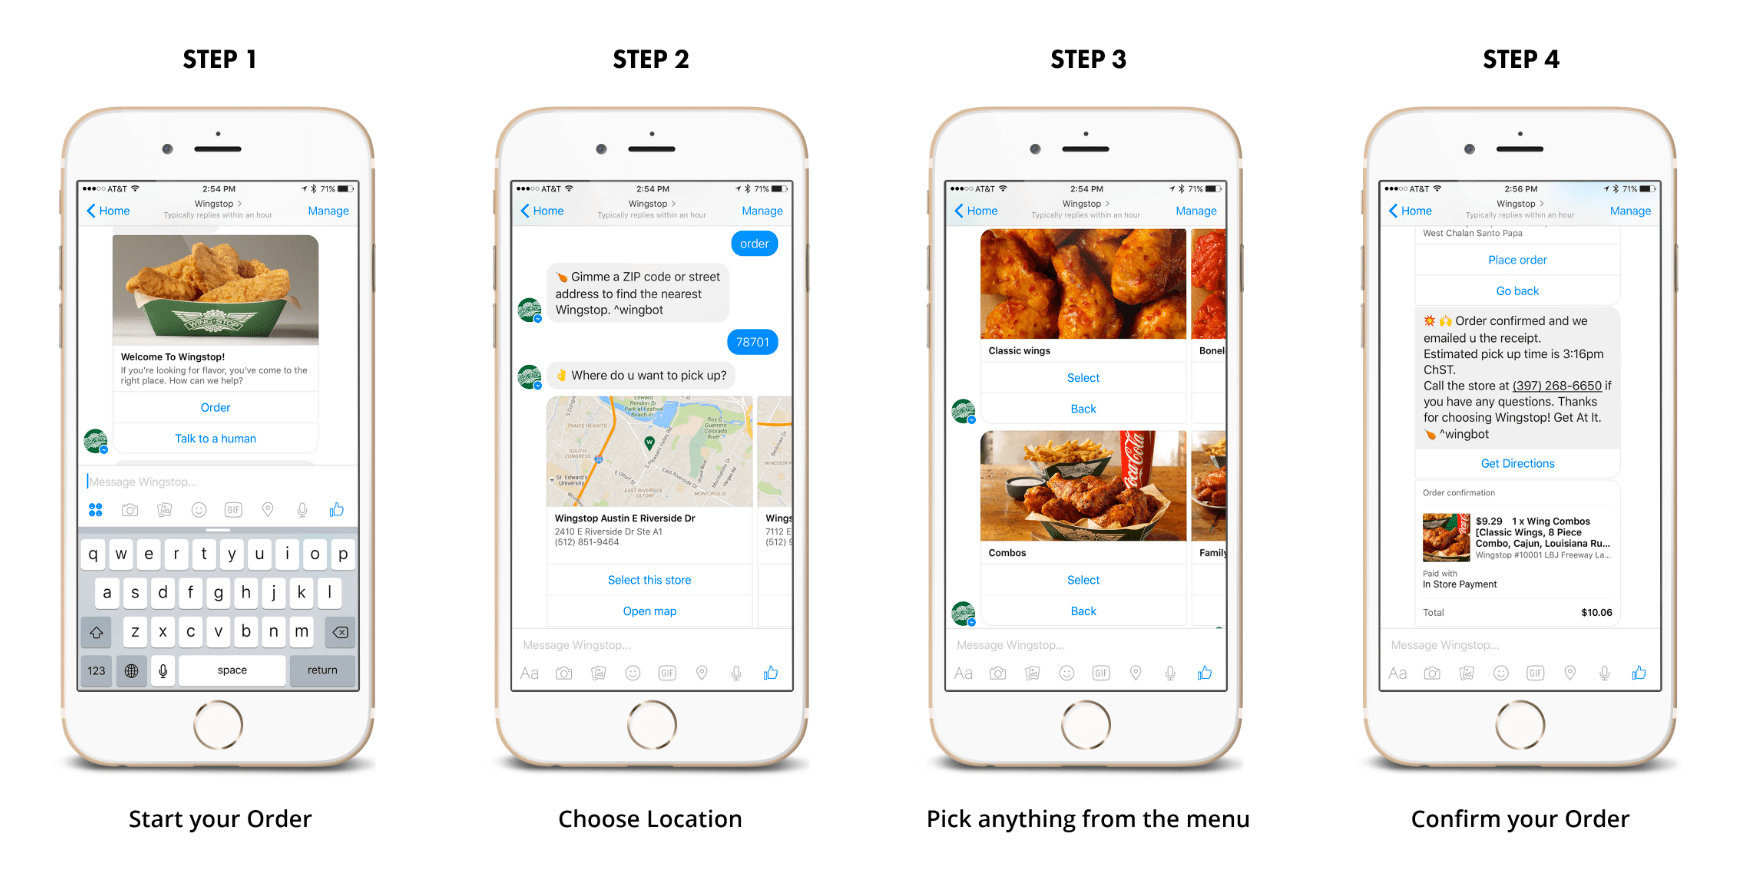 These screenshots show Conversable's order flow for Wingstop on Facebook Messenger.